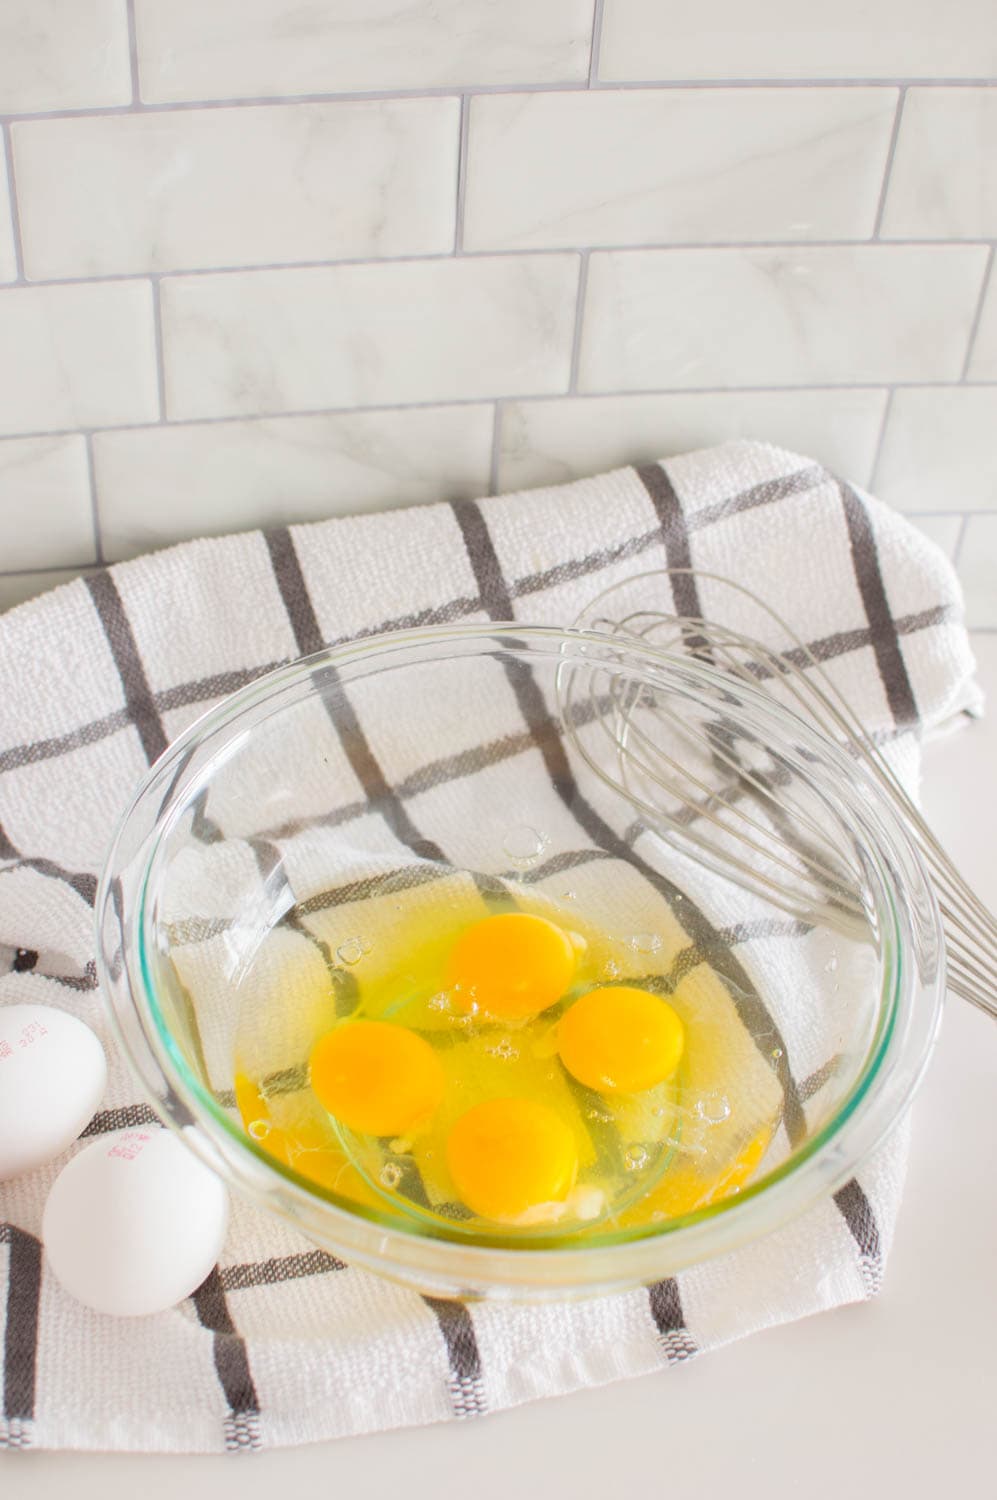 4 eggs in a glass bowl, ready to be whipped to make easy scrambled eggs